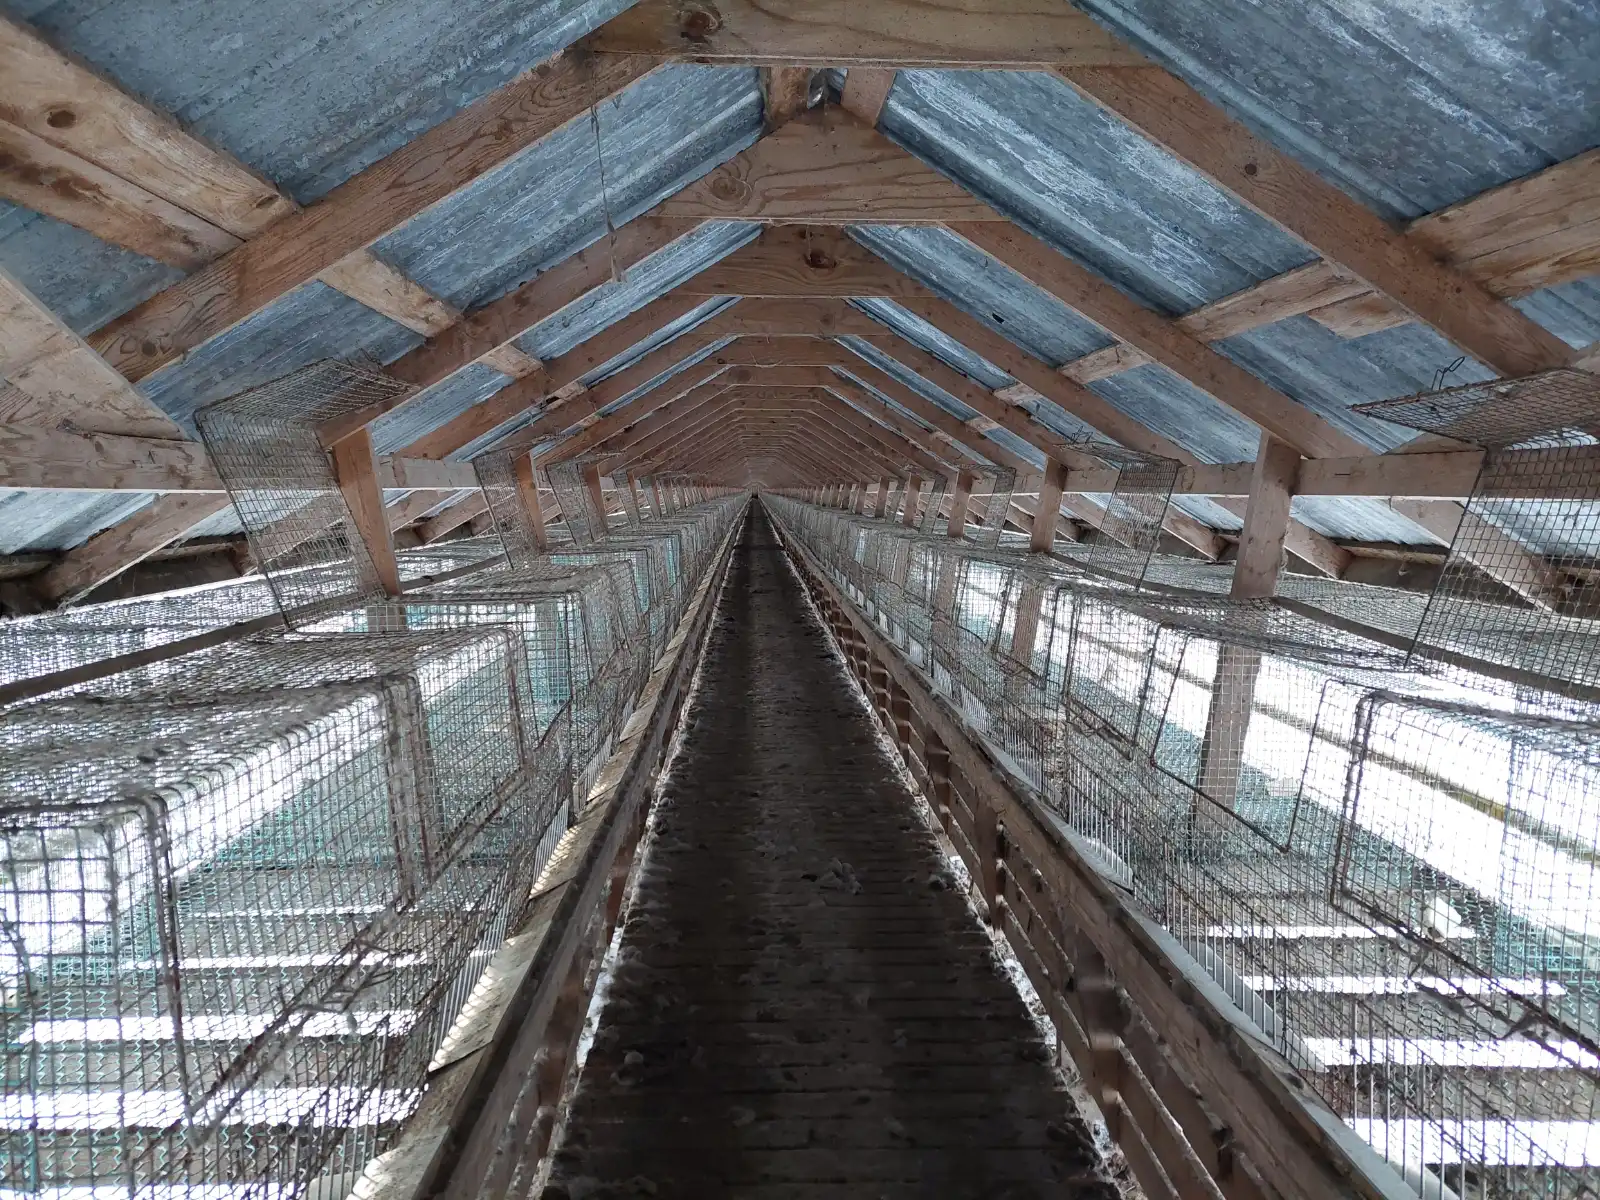 A fur farm shed with empty cages. Snow can be seen at the sides of the shed